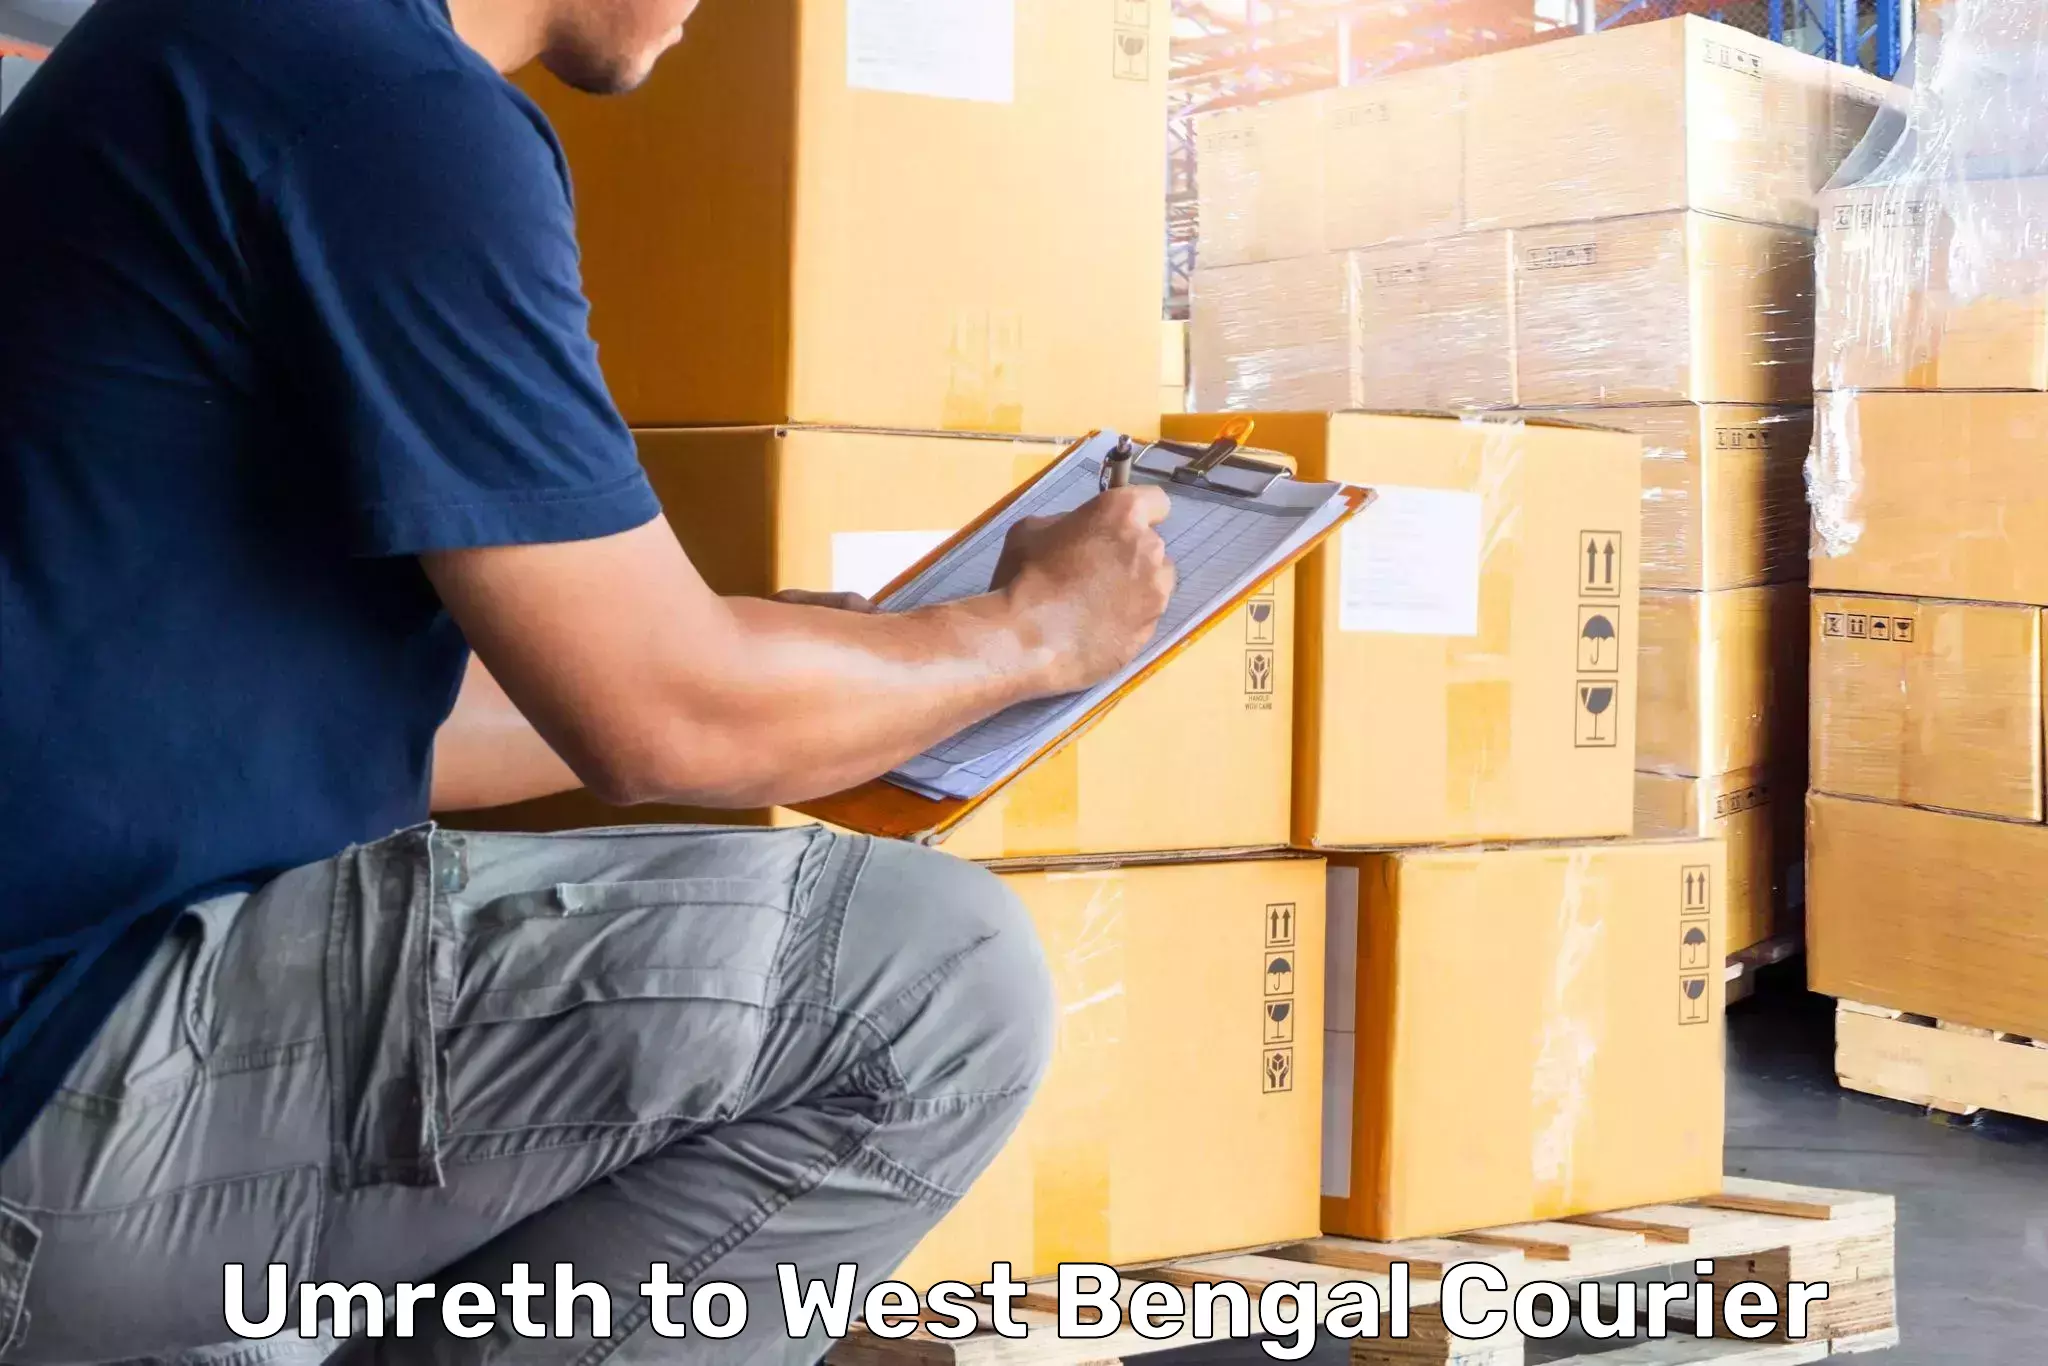 Luggage delivery app Umreth to West Bengal